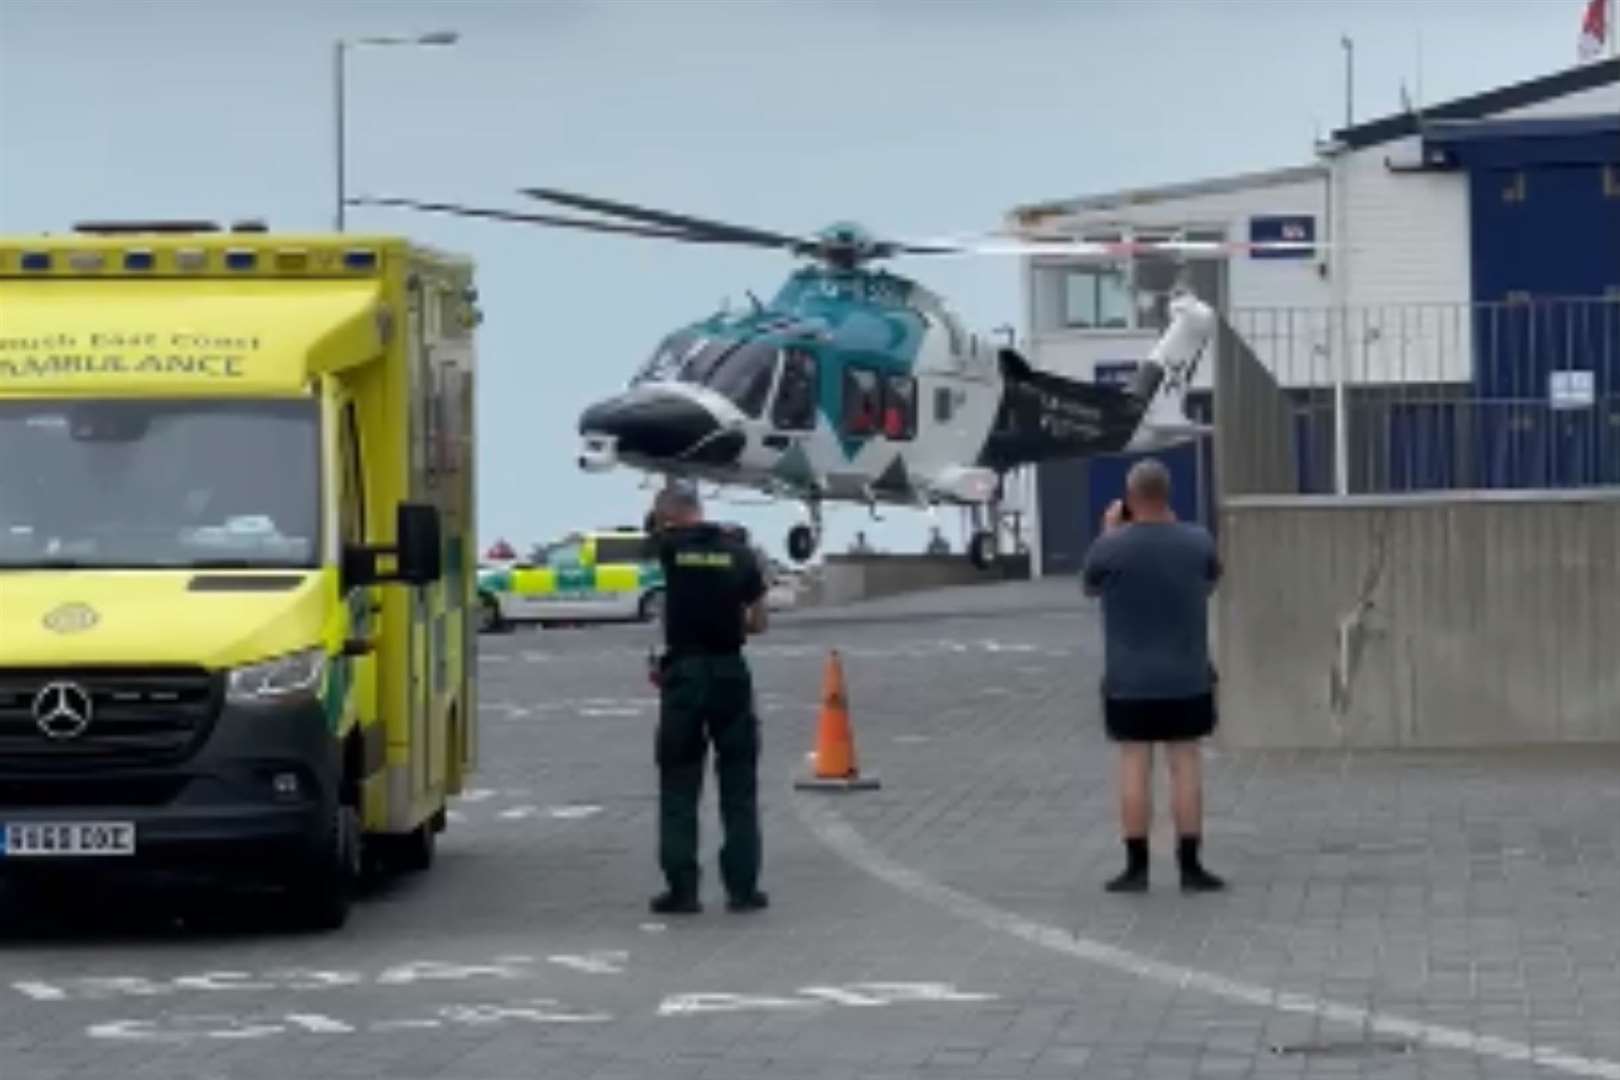 The air ambulance arriving at the gallery this afternoon. Picture: Kevin Clark